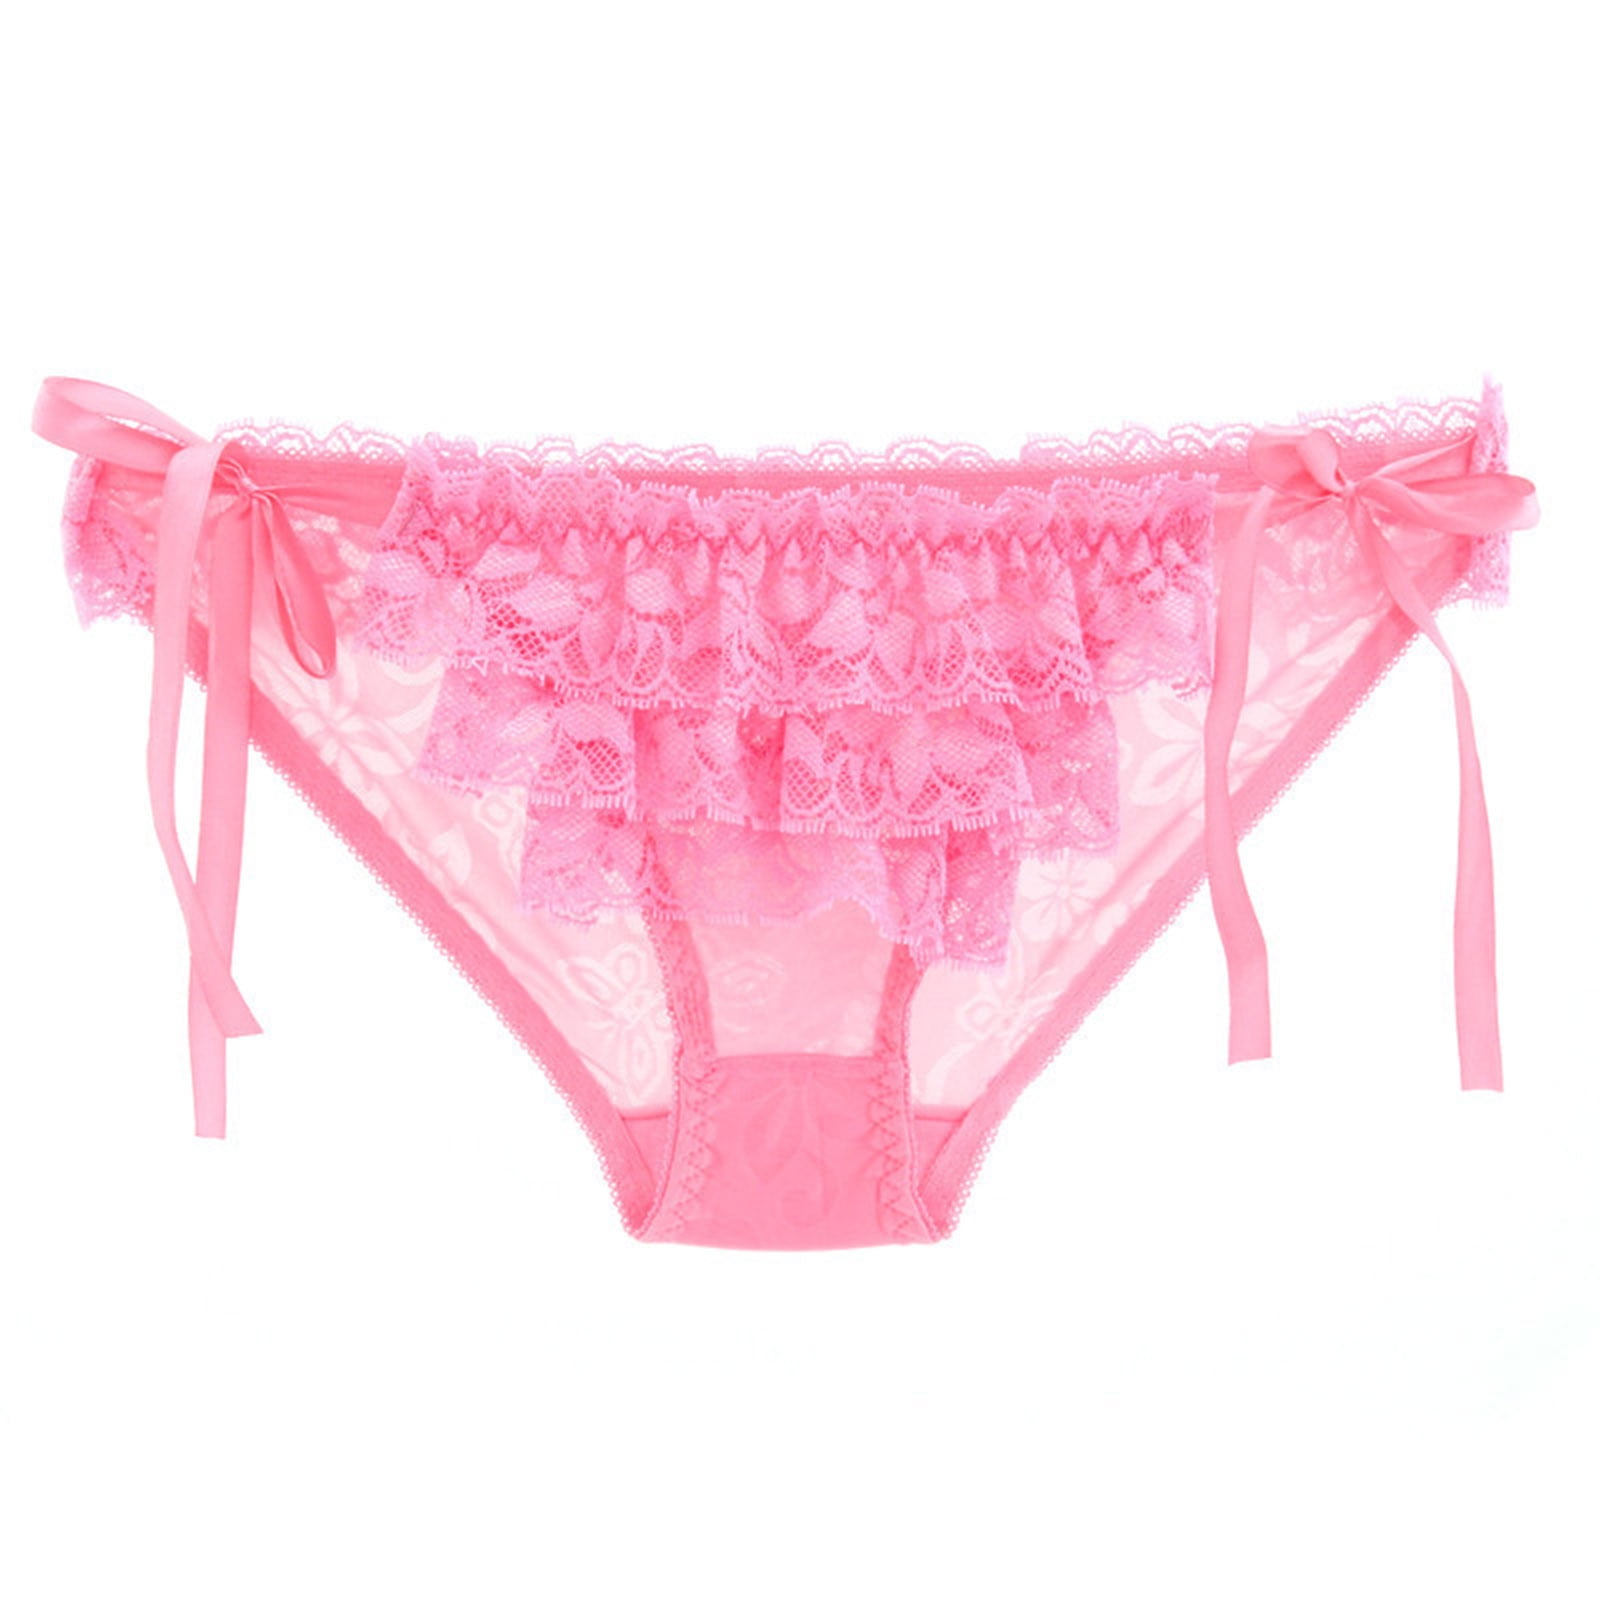 IROINNID T-String Underwear For Women High-Cut Sexy Lace Comfort